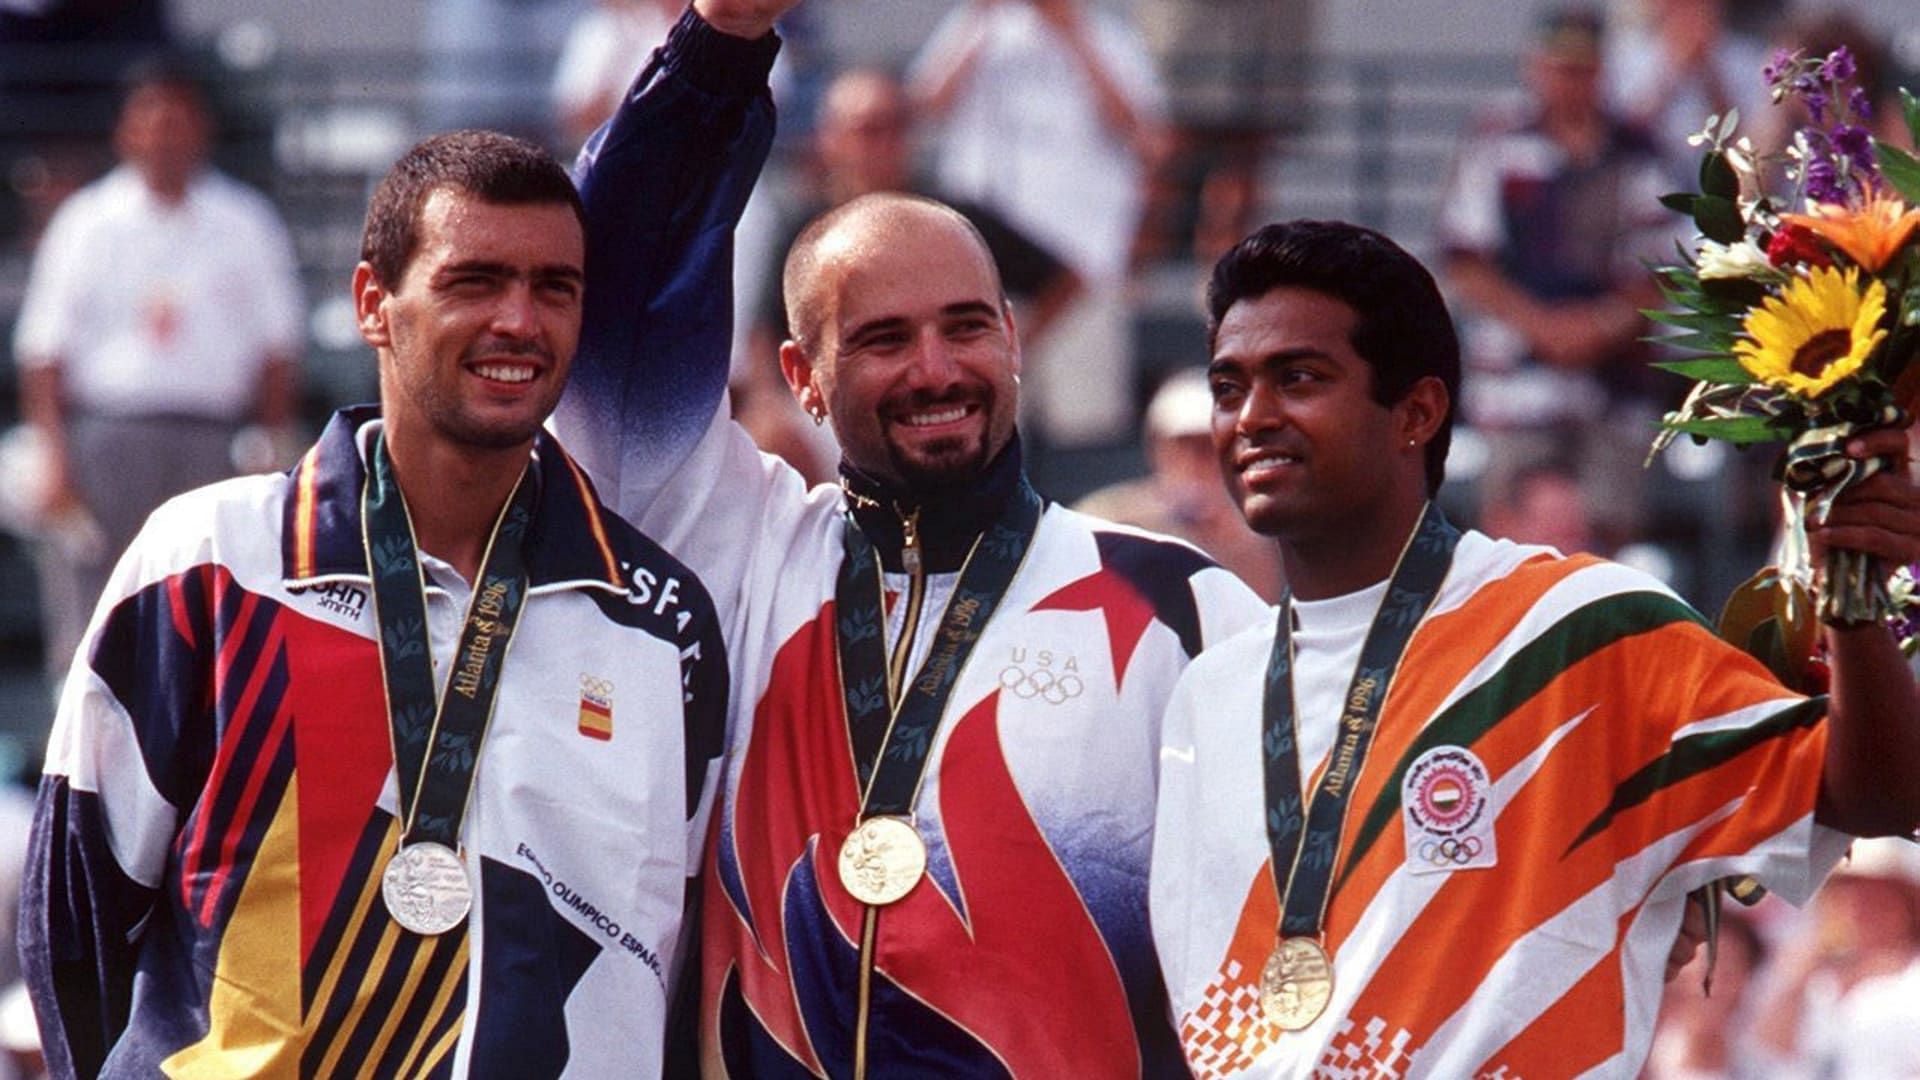 India&#039;s Leander Paes on the podium with Andre Agassi and Sergei Bruguera at the 1996 Atlanta Games